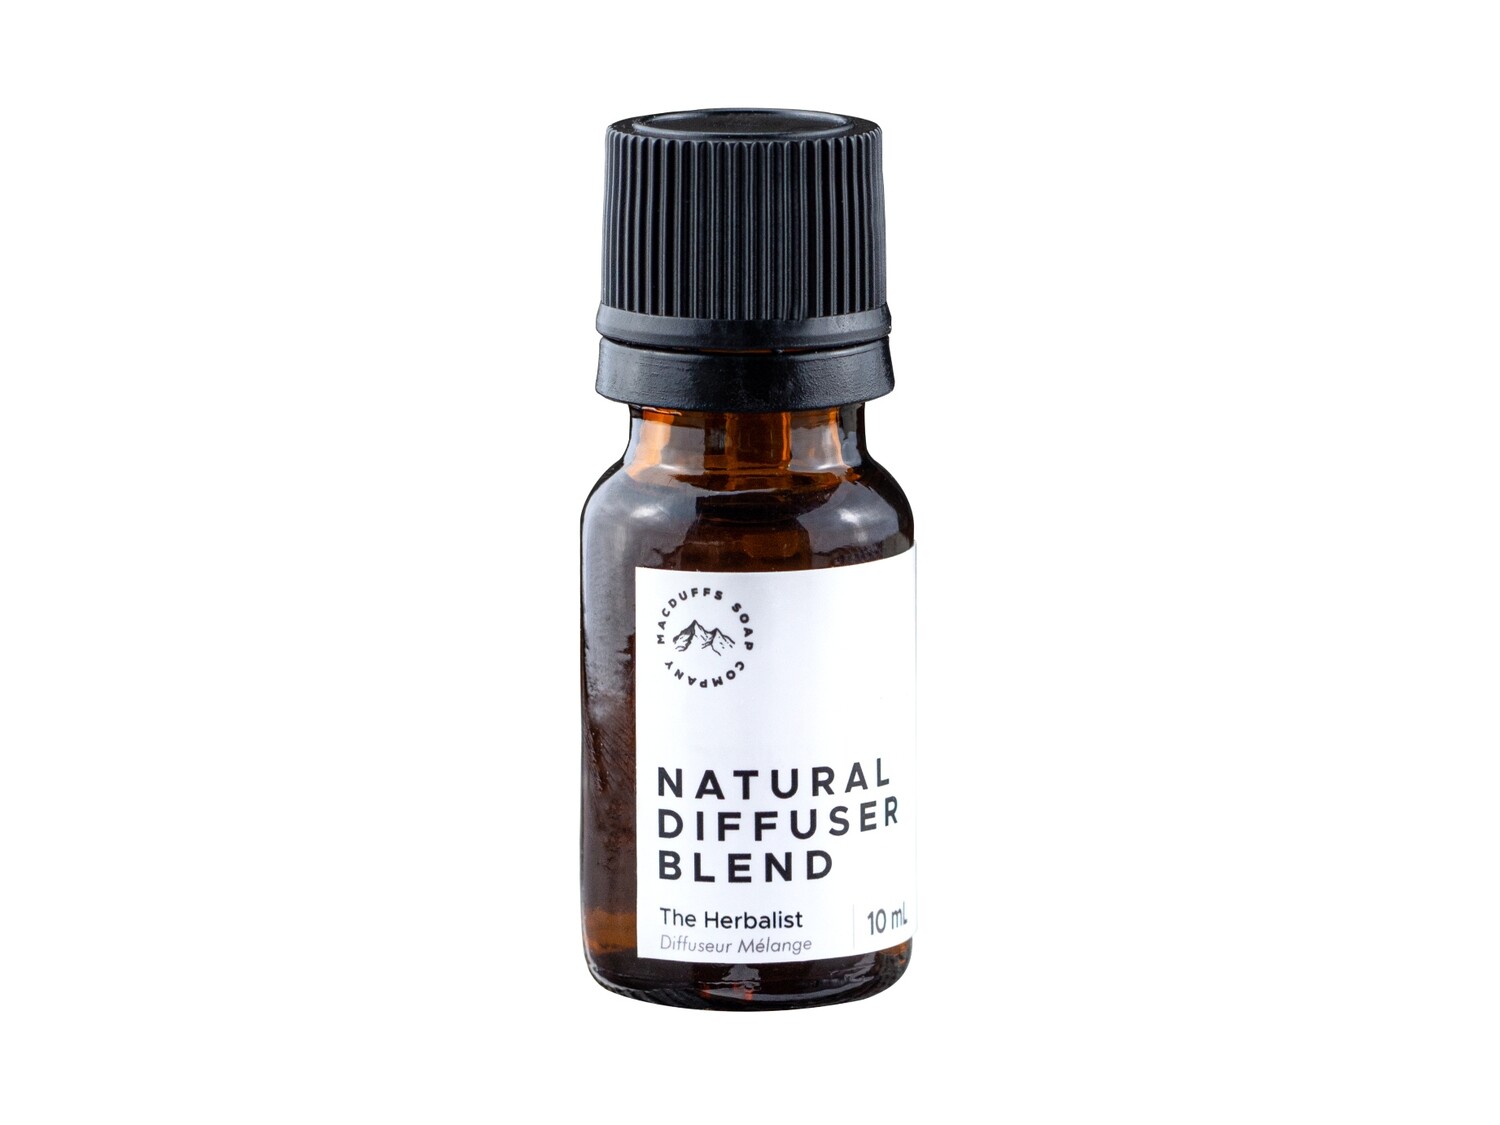 The Herbalist Diffuser Blend